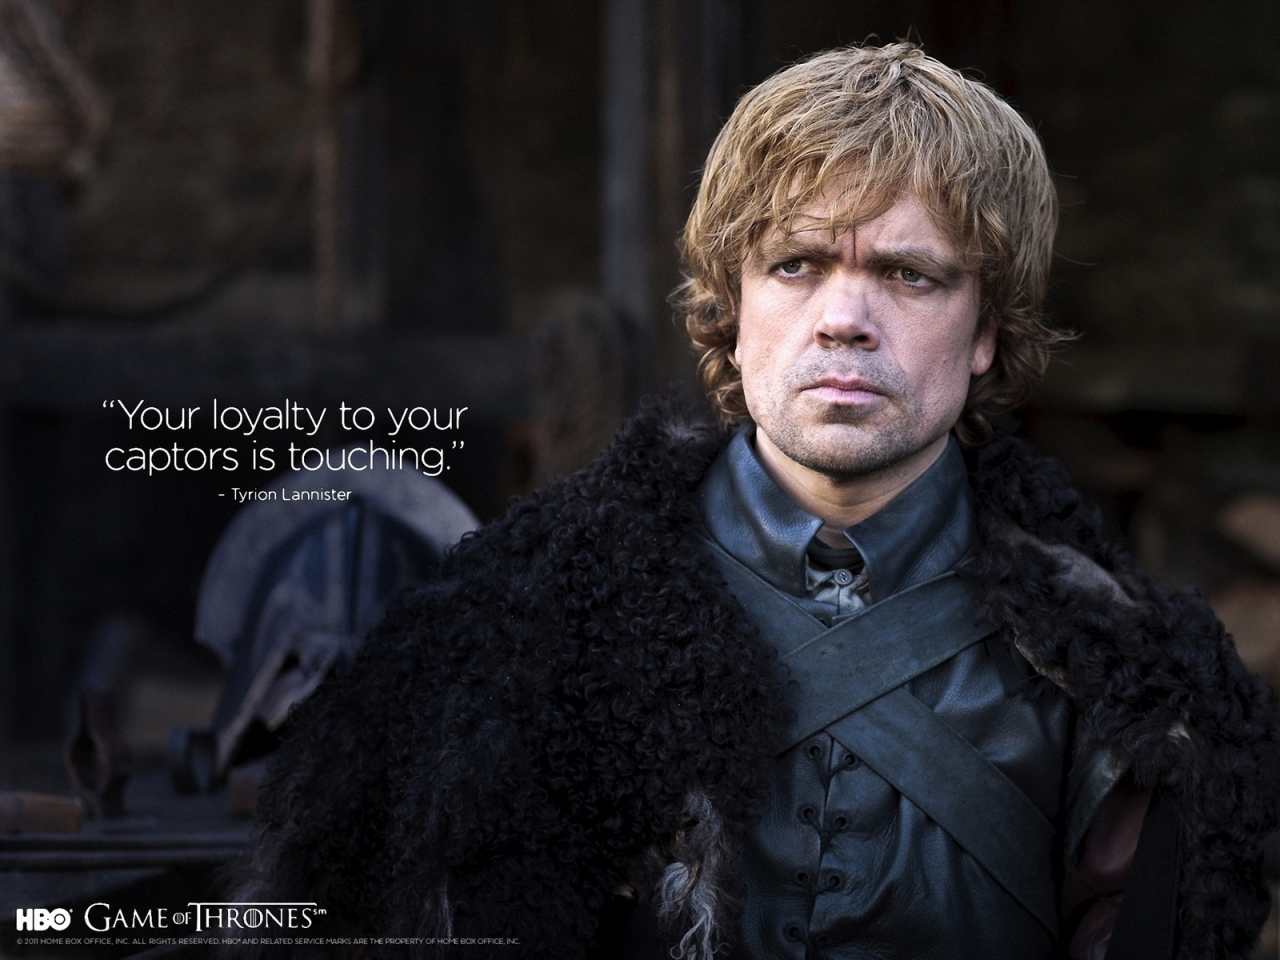 Tyrion Lannister Quote Game of Thrones for 1280 x 960 resolution